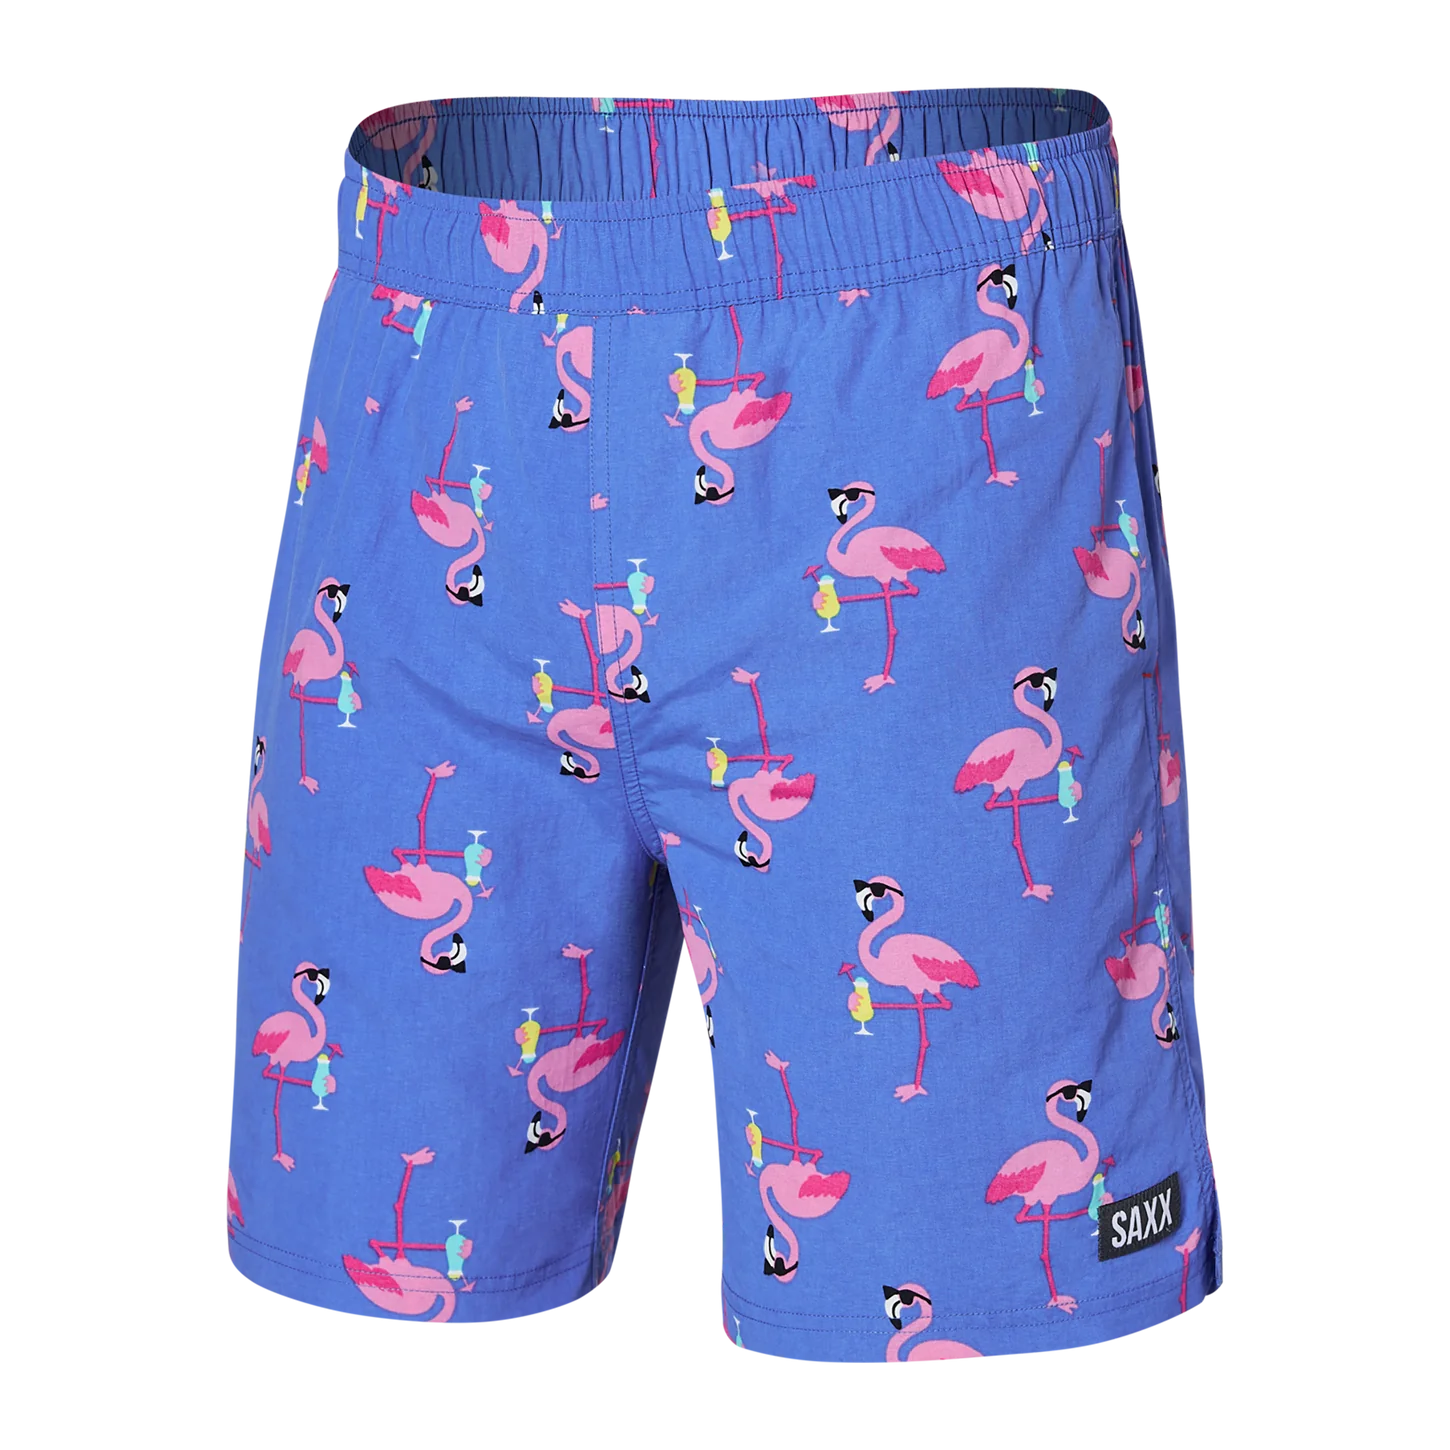 Made for quick dips, park sips, and days out in the sun. Go Coastal is a retro-inspired swim short equipped with a DropTemp™ Cooling Hydro Liner and the BallPark Pouch™. Built from the inside out, the liner is super-light for quick-dry comfort while the patented pouch holds everything in place.